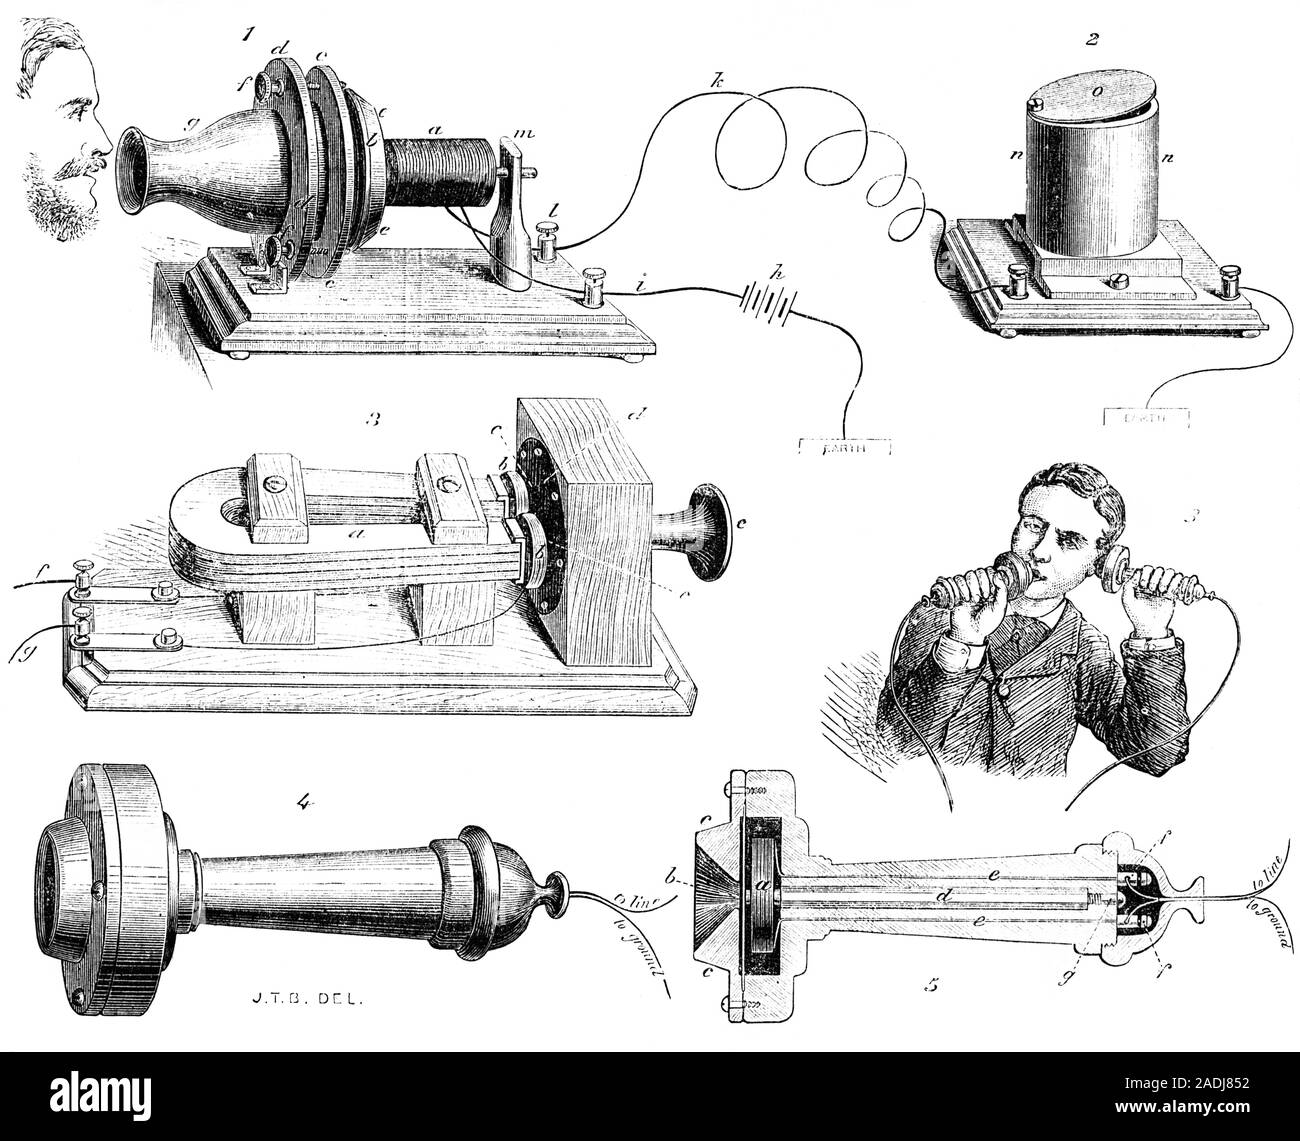 1870s 1876 ILLUSTRATION ALEXANDER GRAHAM BELL’S EARLY TELEPHONE TRANSMITTER AND RECEIVER  - o5547 CPC001 HARS HALF-LENGTH PERSONS MALES SPEAK DISTANCE MECHANICAL HEAR PORTABLE B&W SUCCESS ILLUSTRATIONS HAPPINESS WELLNESS EARLY CUSTOMER SERVICE NETWORKING KNOWLEDGE PROGRESS VOICE VOCAL INNOVATION OPPORTUNITY DIAGRAM HIGH TECH CONNECTION GRAHAM 19TH CENTURY 1870s HEARING INVENTION RECEIVER STYLISH SUPPORT LONG DISTANCE ALEXANDER GRAHAM BELL IDEAS SOLUTIONS YOUNG ADULT MAN 1877 ALEXANDER AUDITORY BLACK AND WHITE CROSS SECTION OLD FASHIONED SECTION Stock Photo